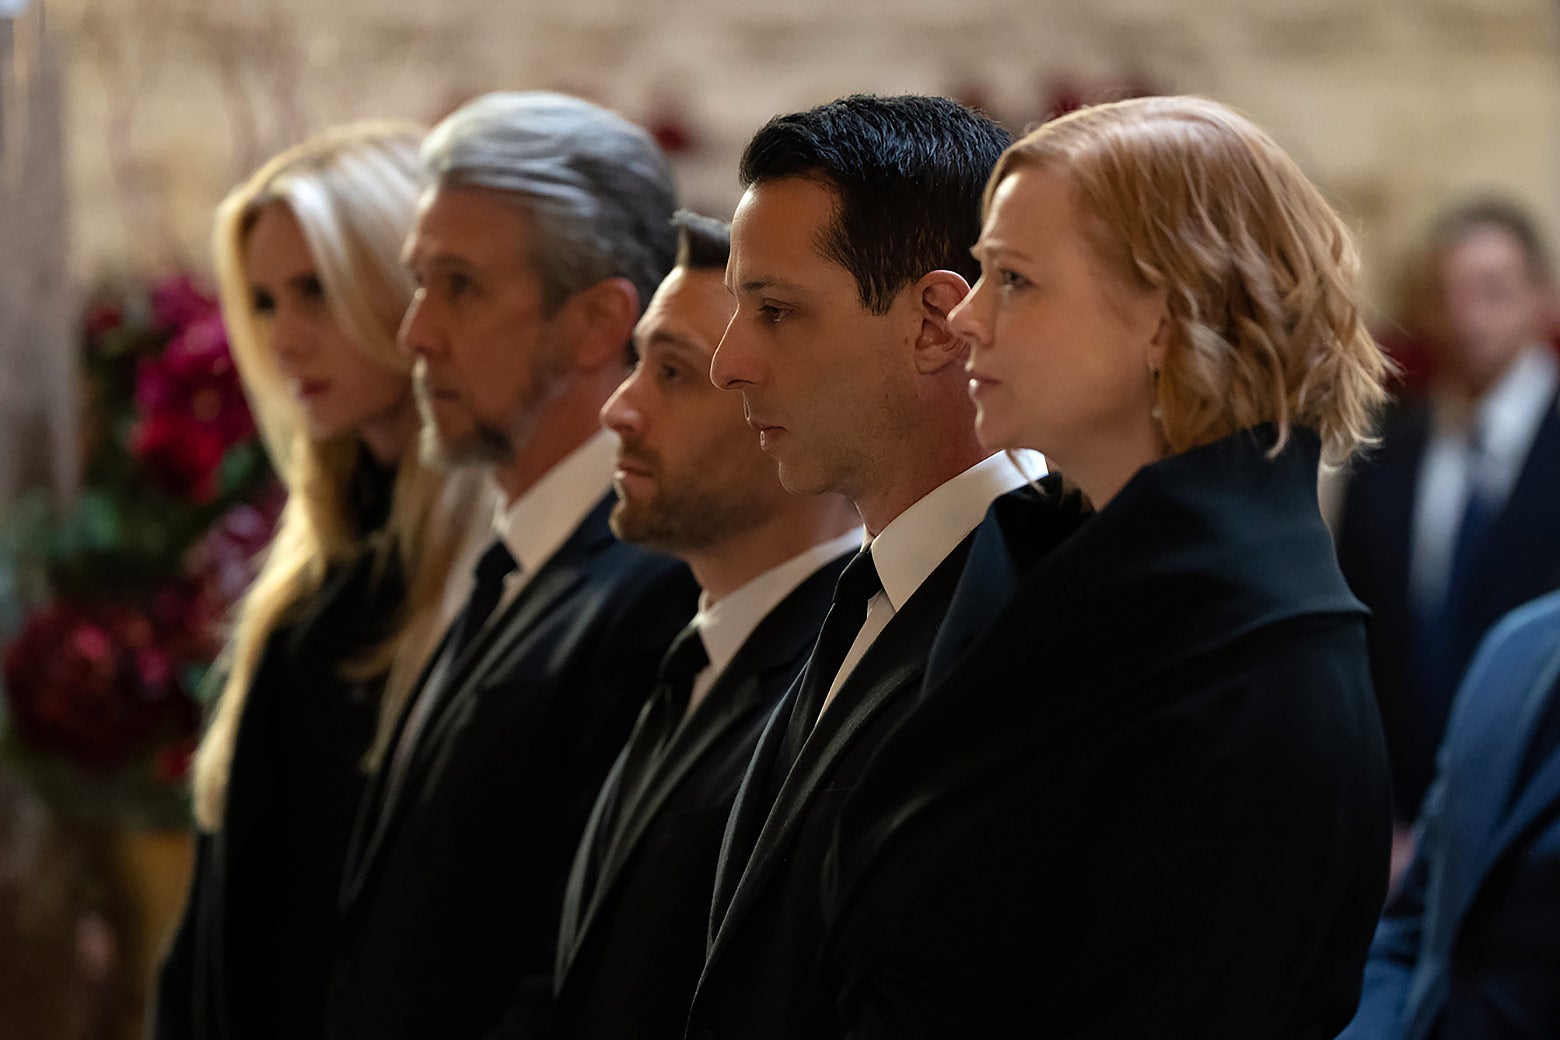 Willa, Connor, Roman, Kendall, and Shiv lined up, dressed in black for a funeral.